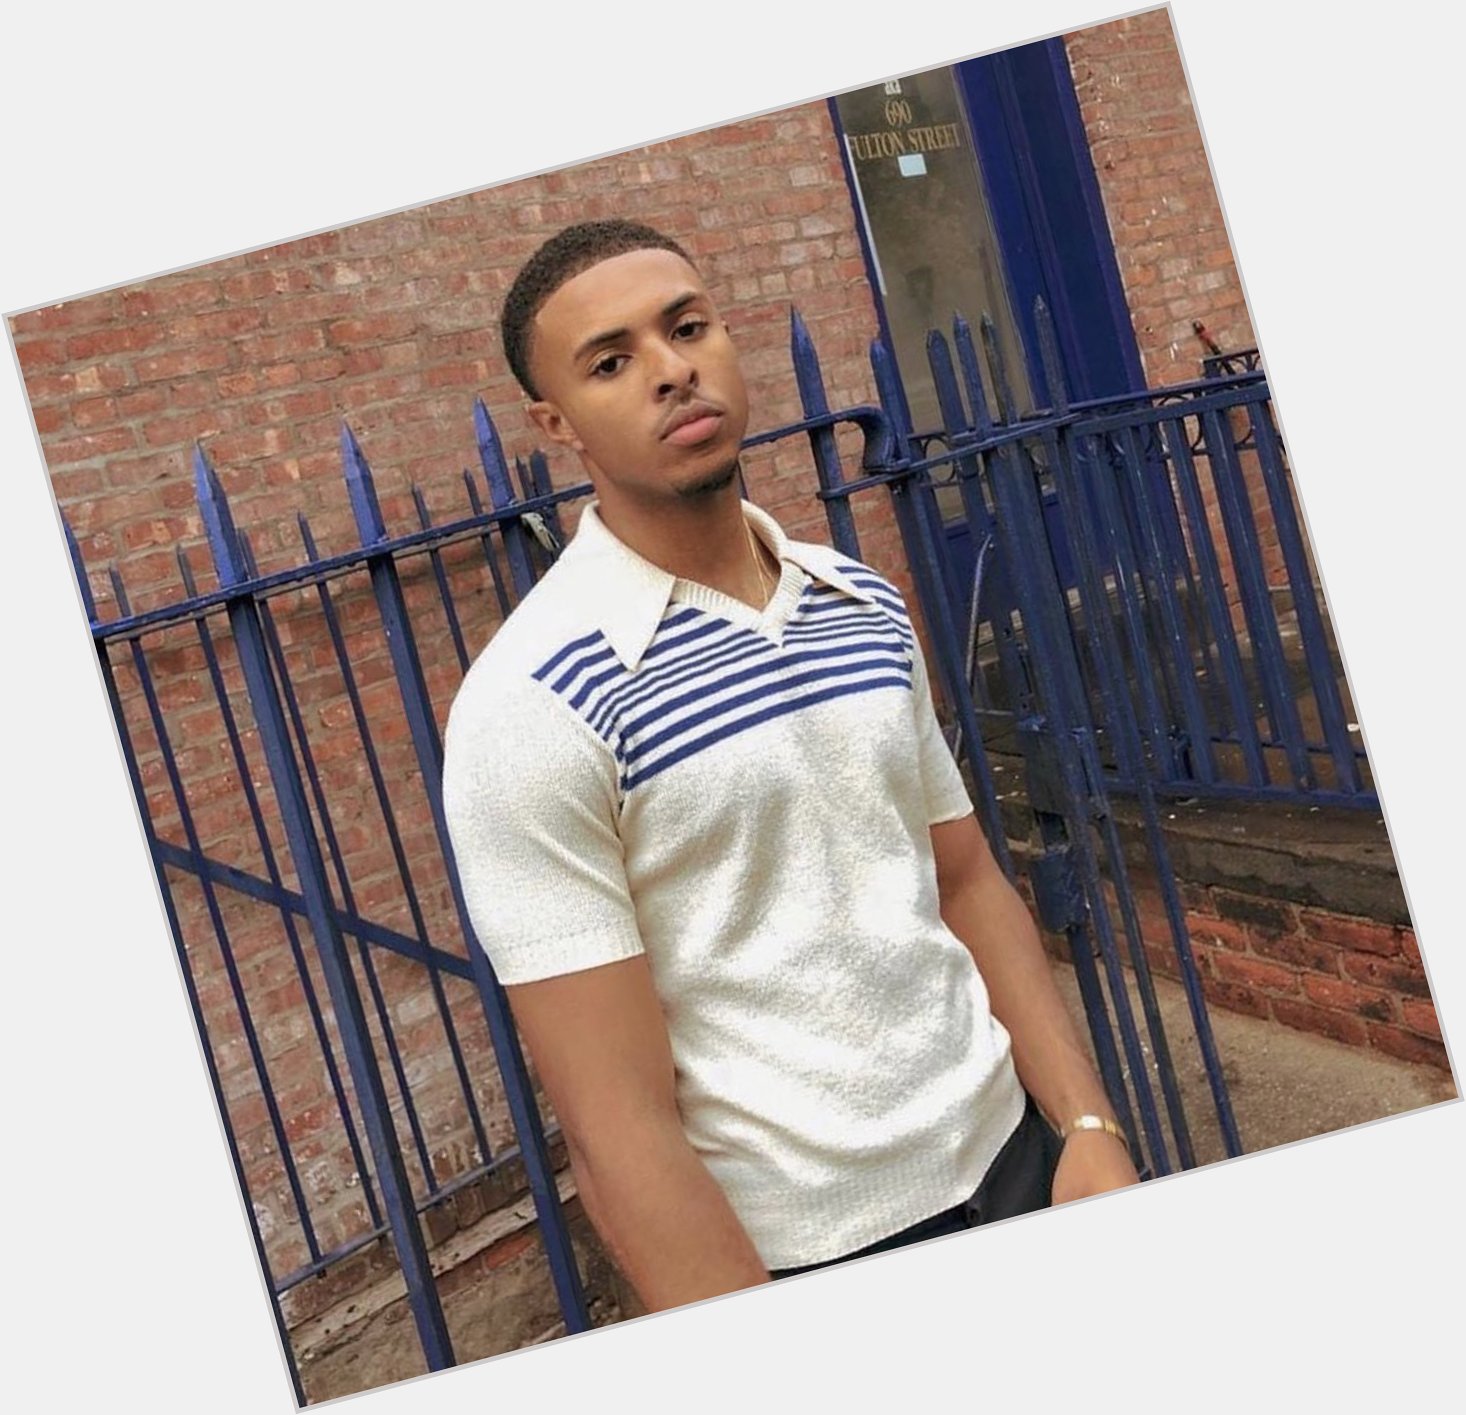 Happy Birthday to Diggy Simmons who is 24 today!!! 